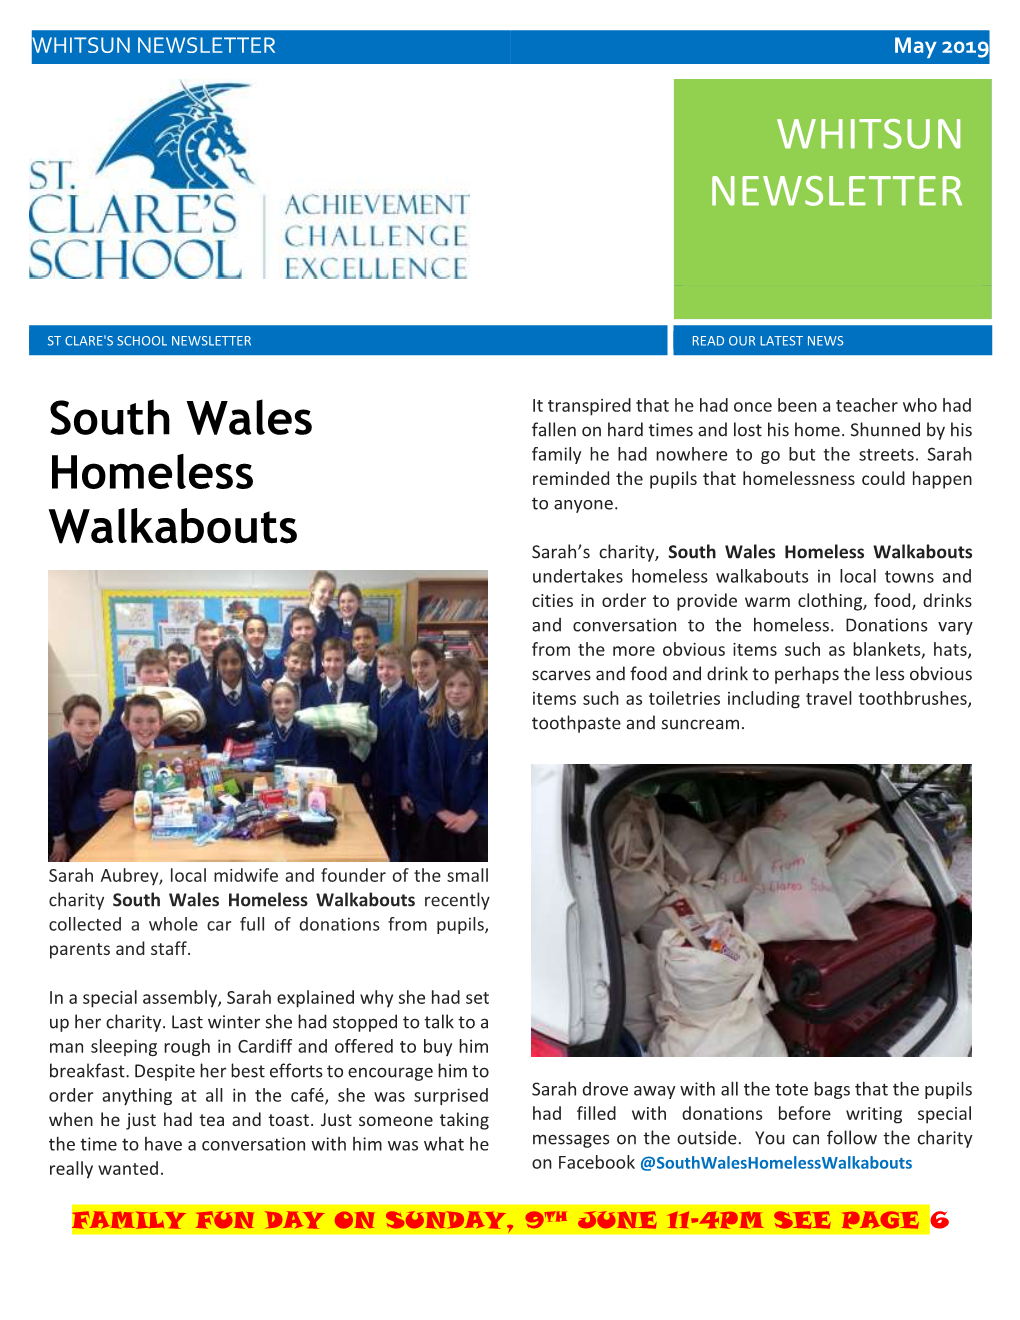 WHITSUN NEWSLETTER South Wales Homeless Walkabouts